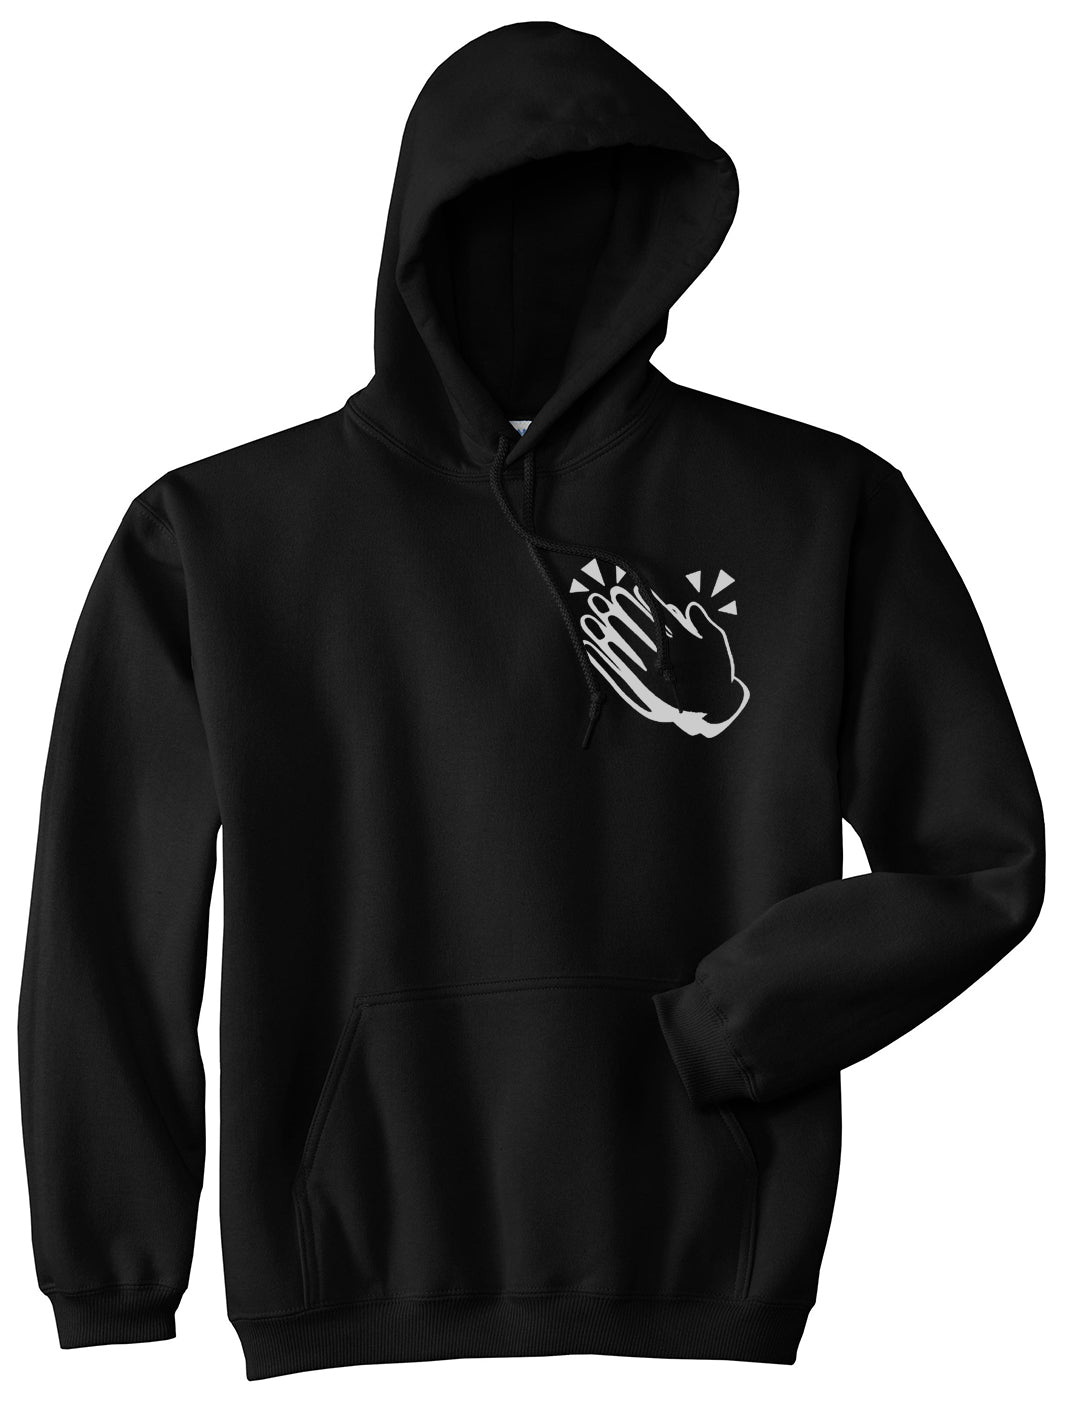 Clapping Hands Emoji Chest Mens Black Pullover Hoodie by Kings Of NY